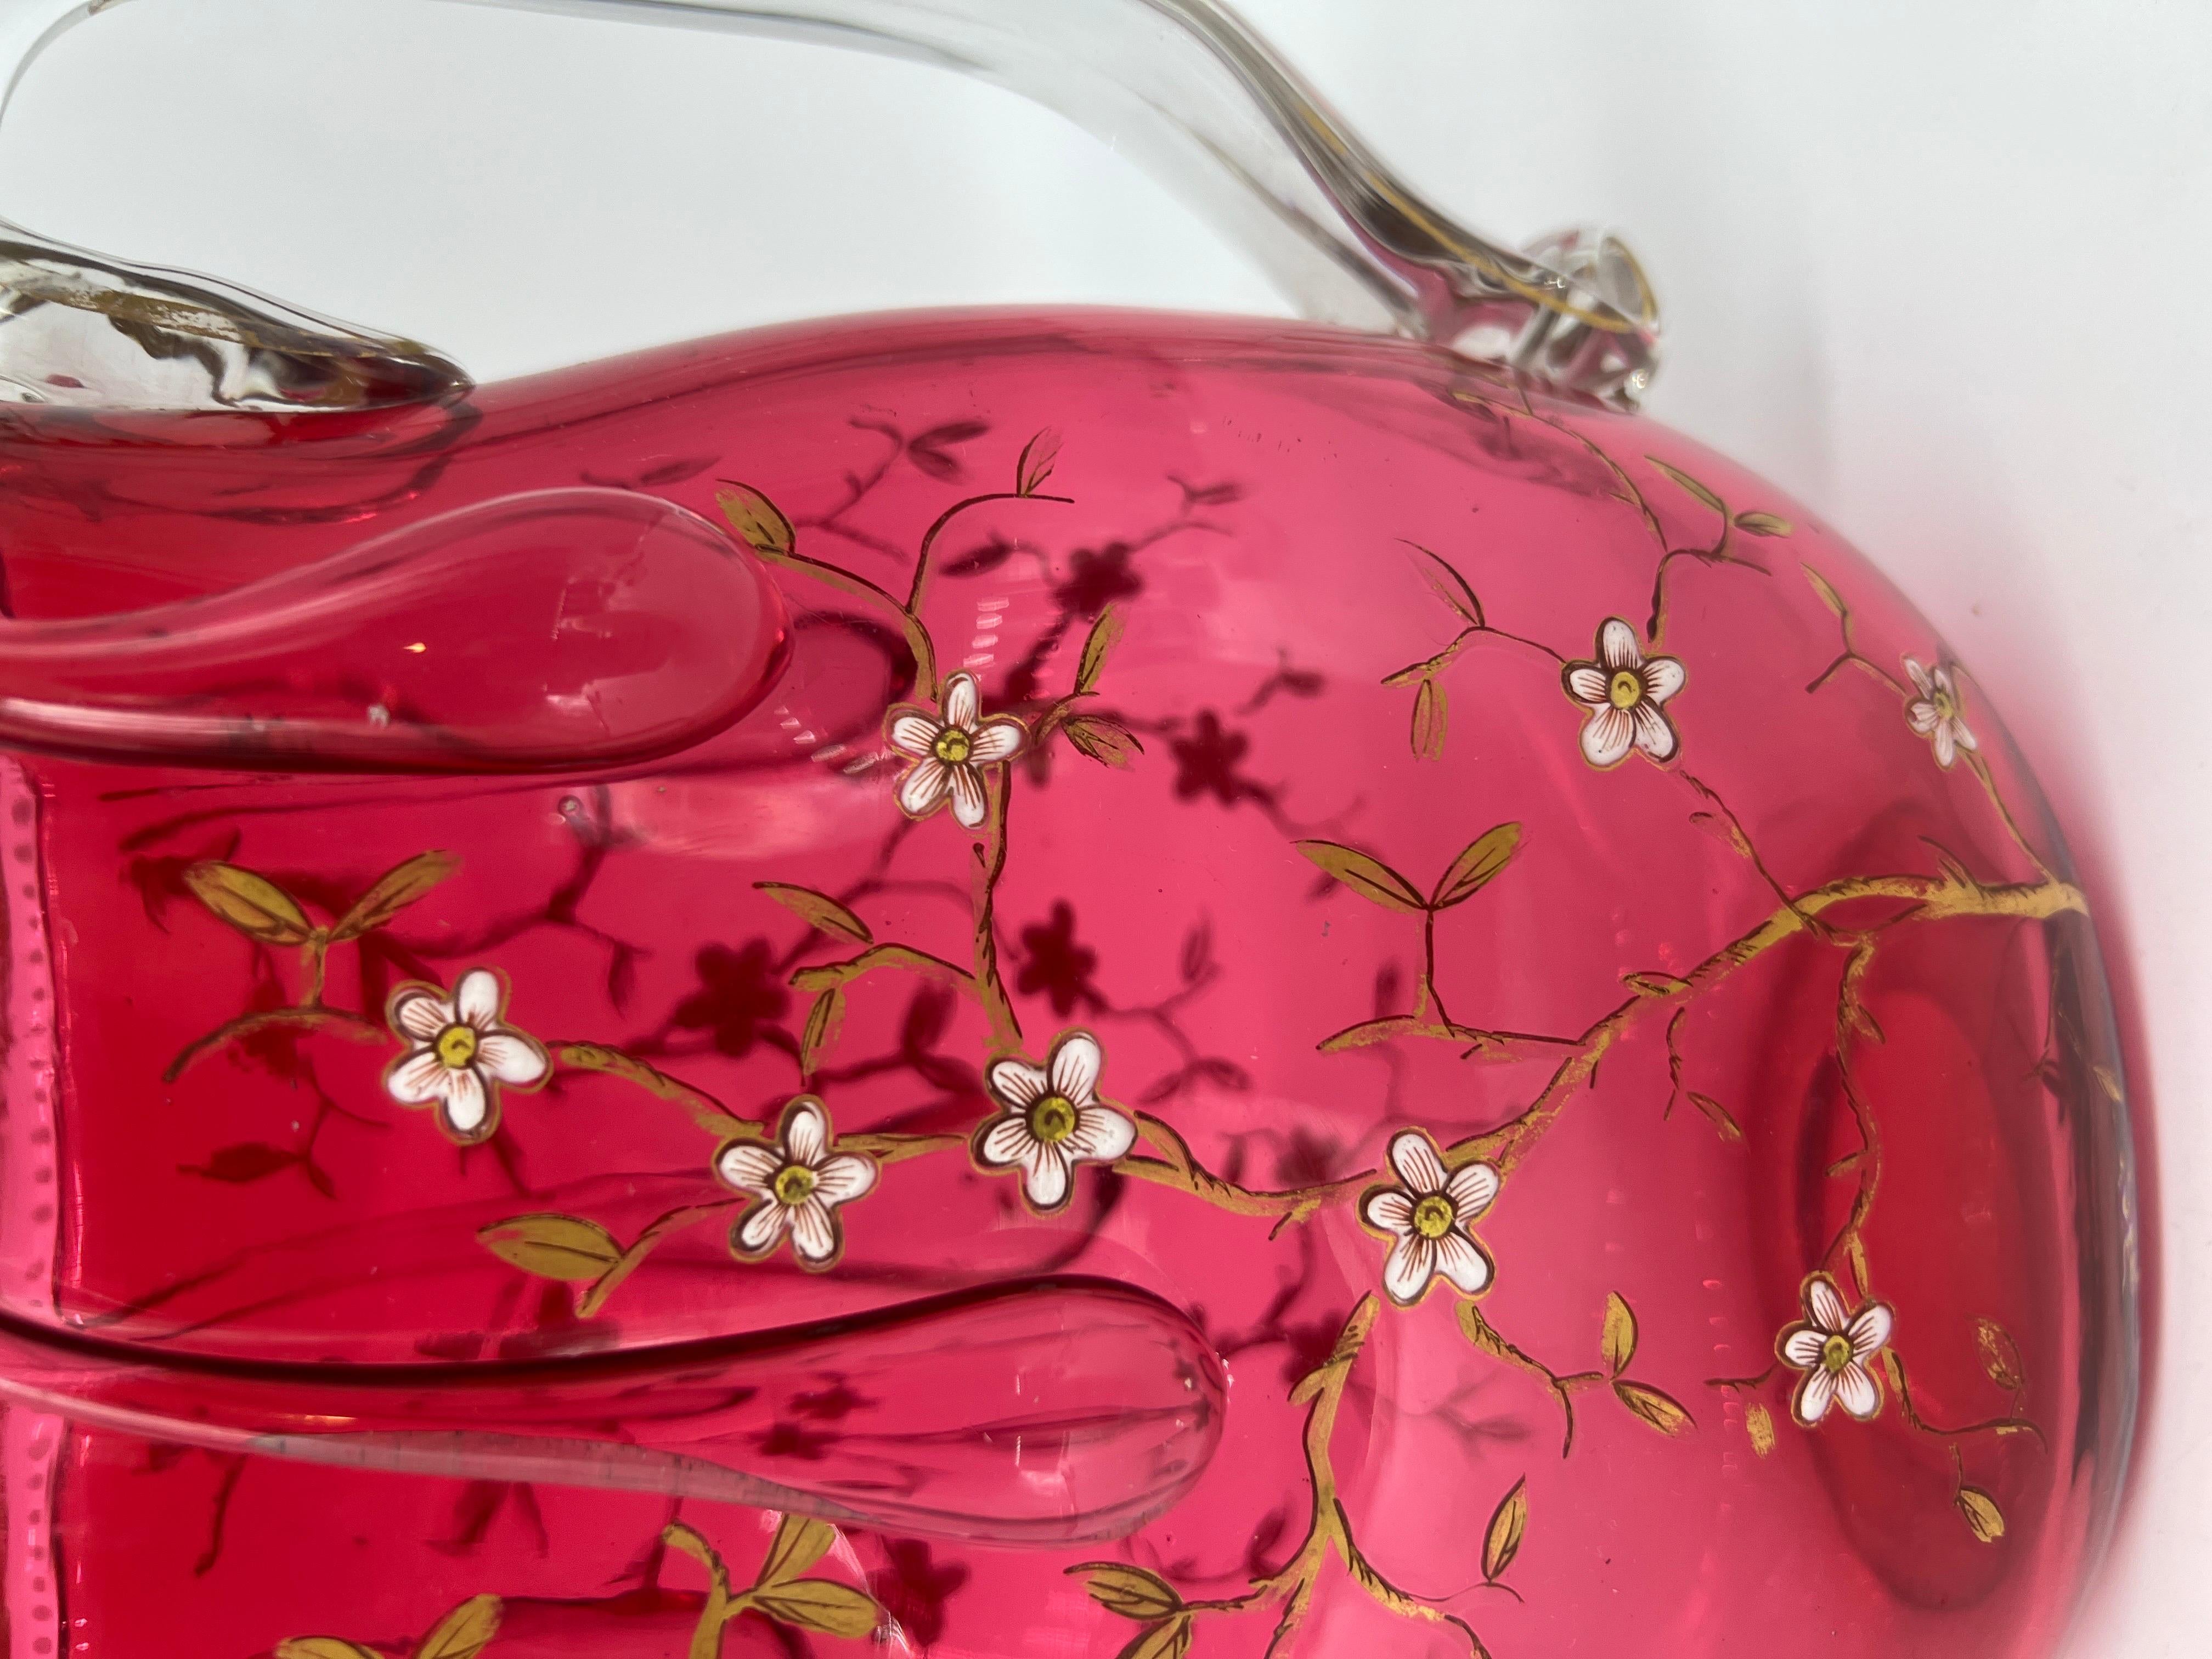 19th Century Rare Moser Floral Enamel & Drip Decorated Cranberry Art Glass Pitcher For Sale